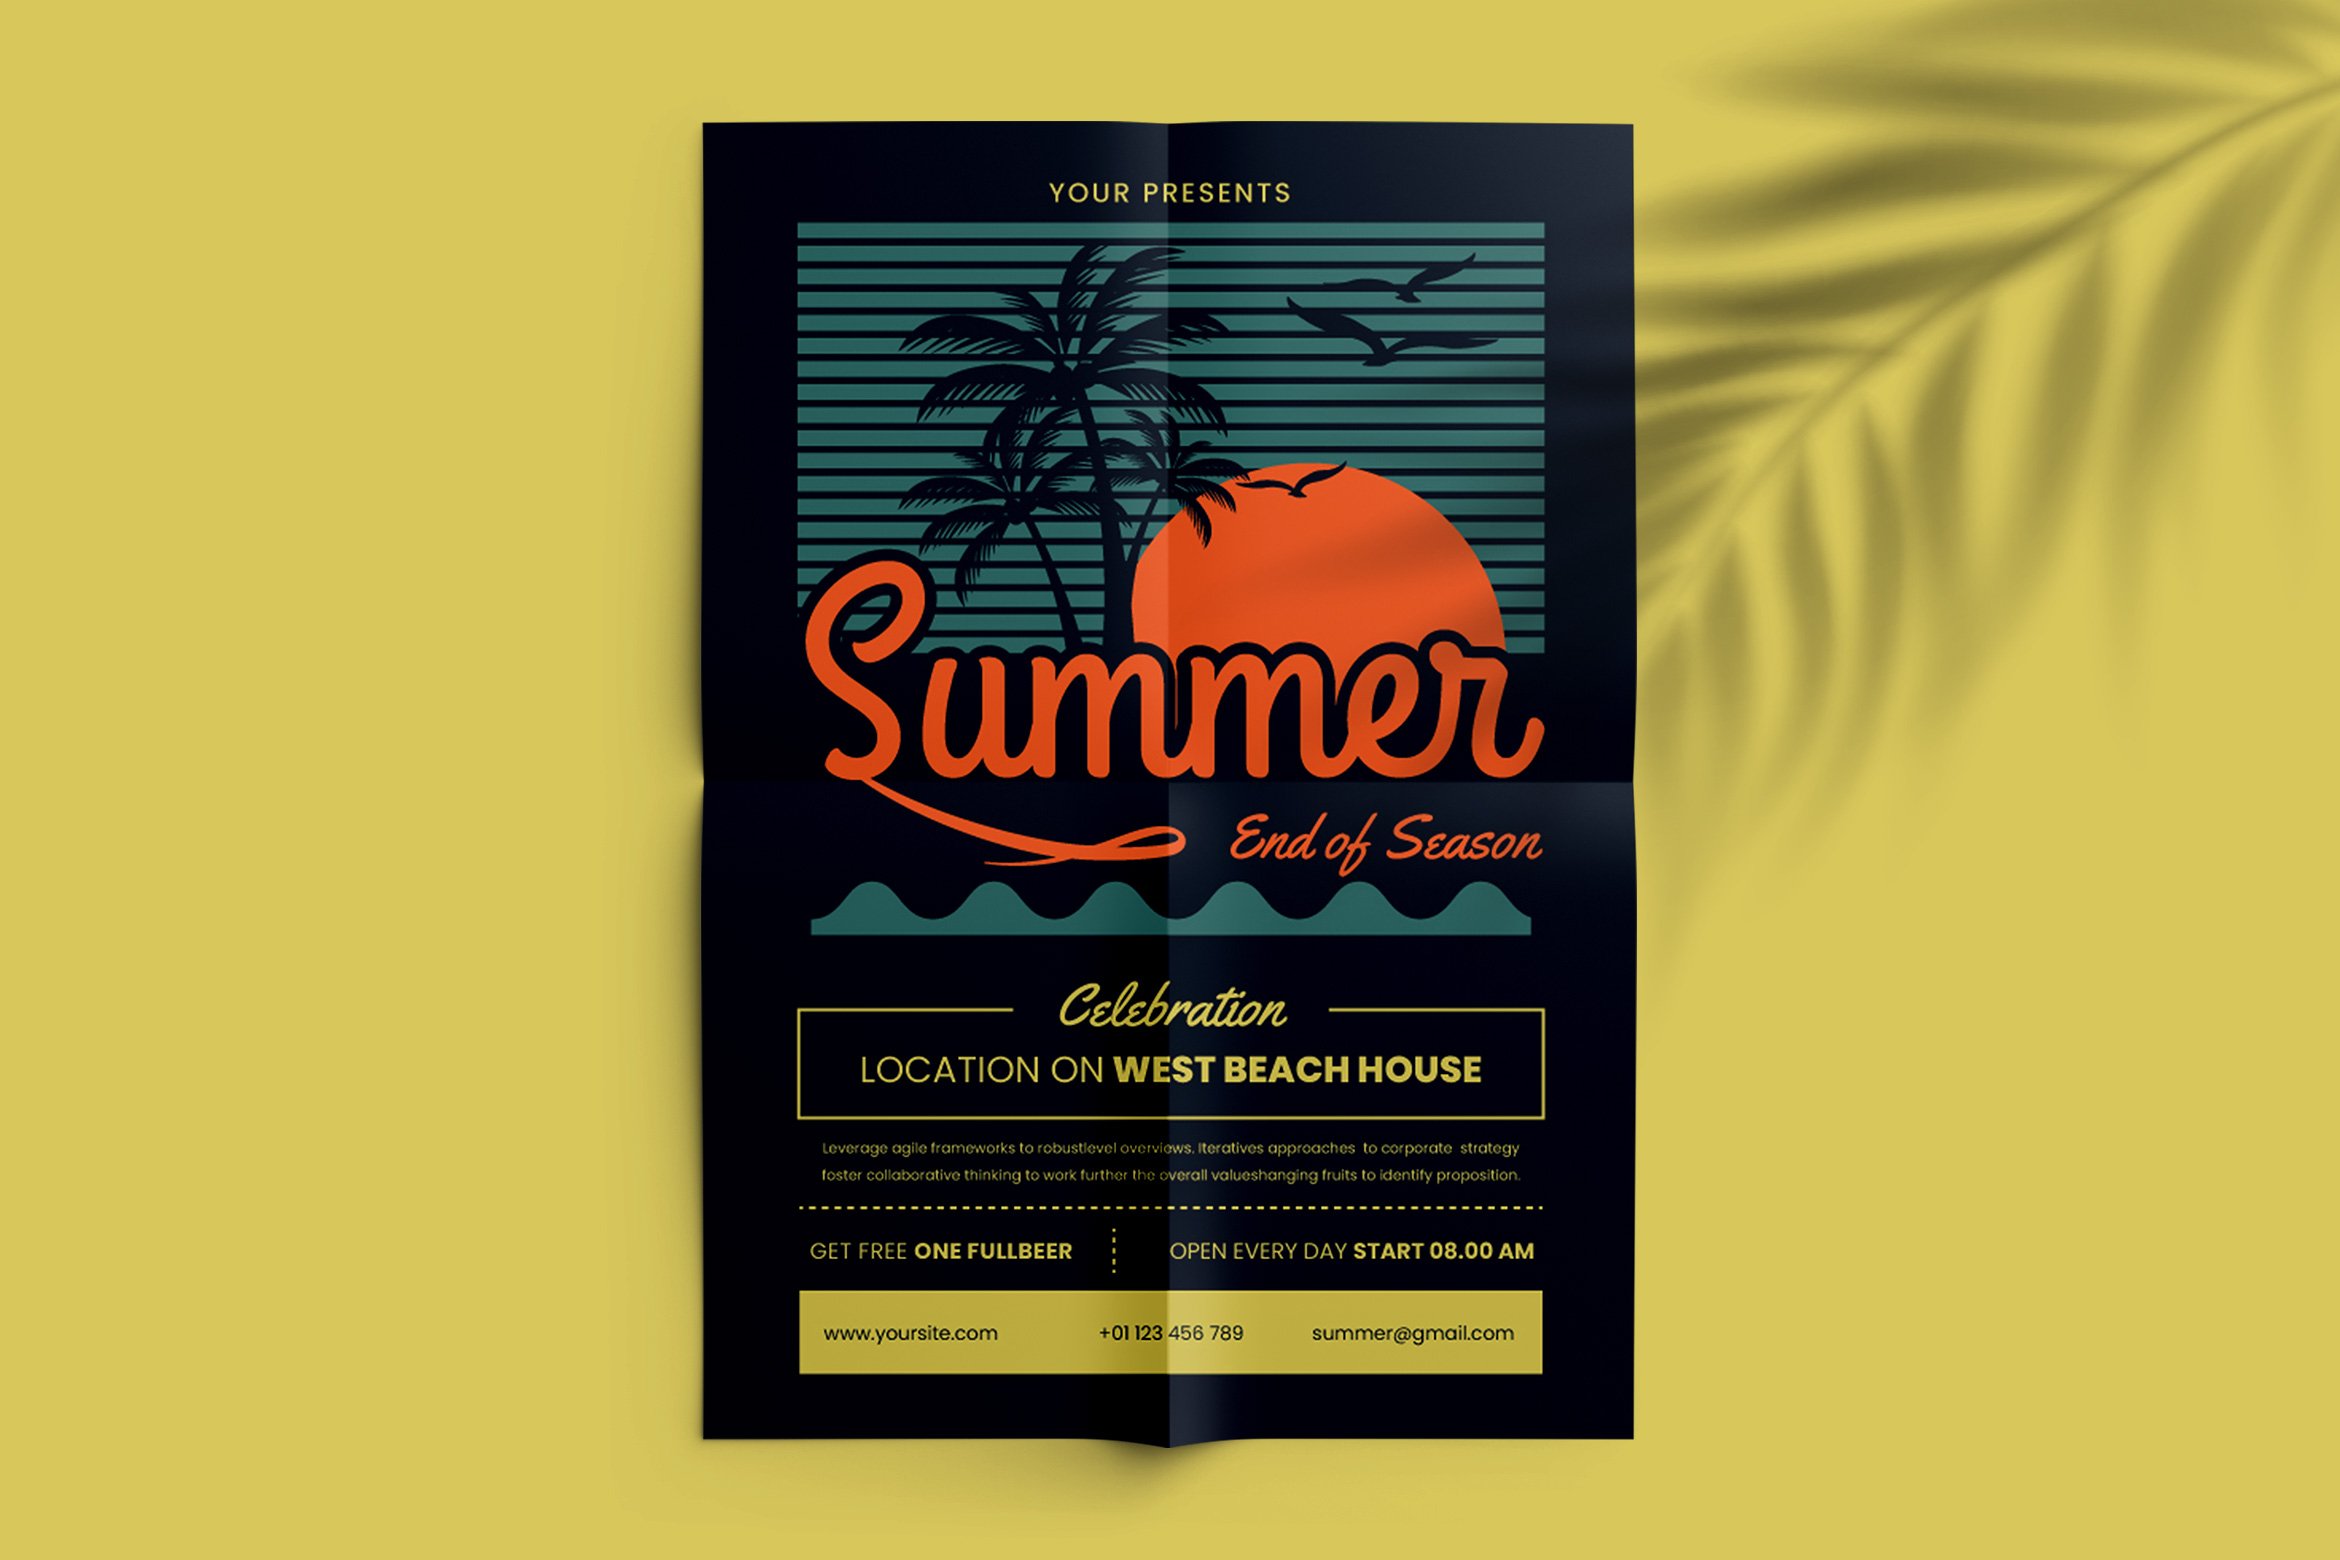 The End of Summer Flyer